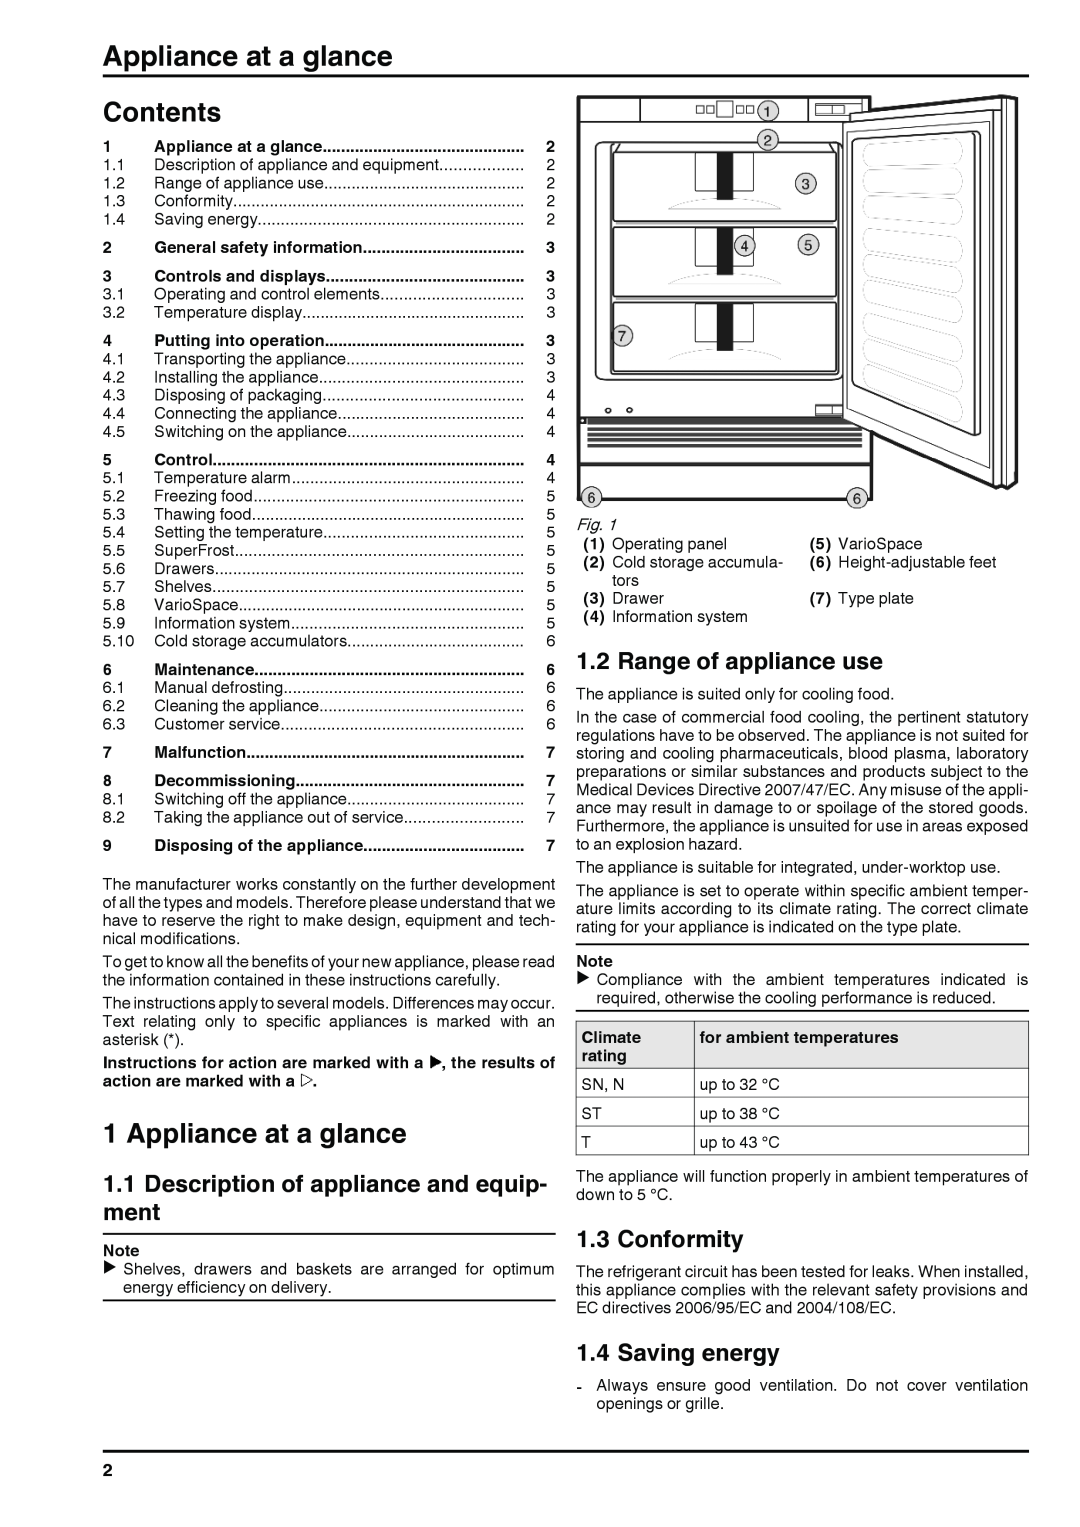 Liebherr UIG1313 Appliance at a glance, Contents, 1.1Description of appliance and equip- ment, Range of appliance use 